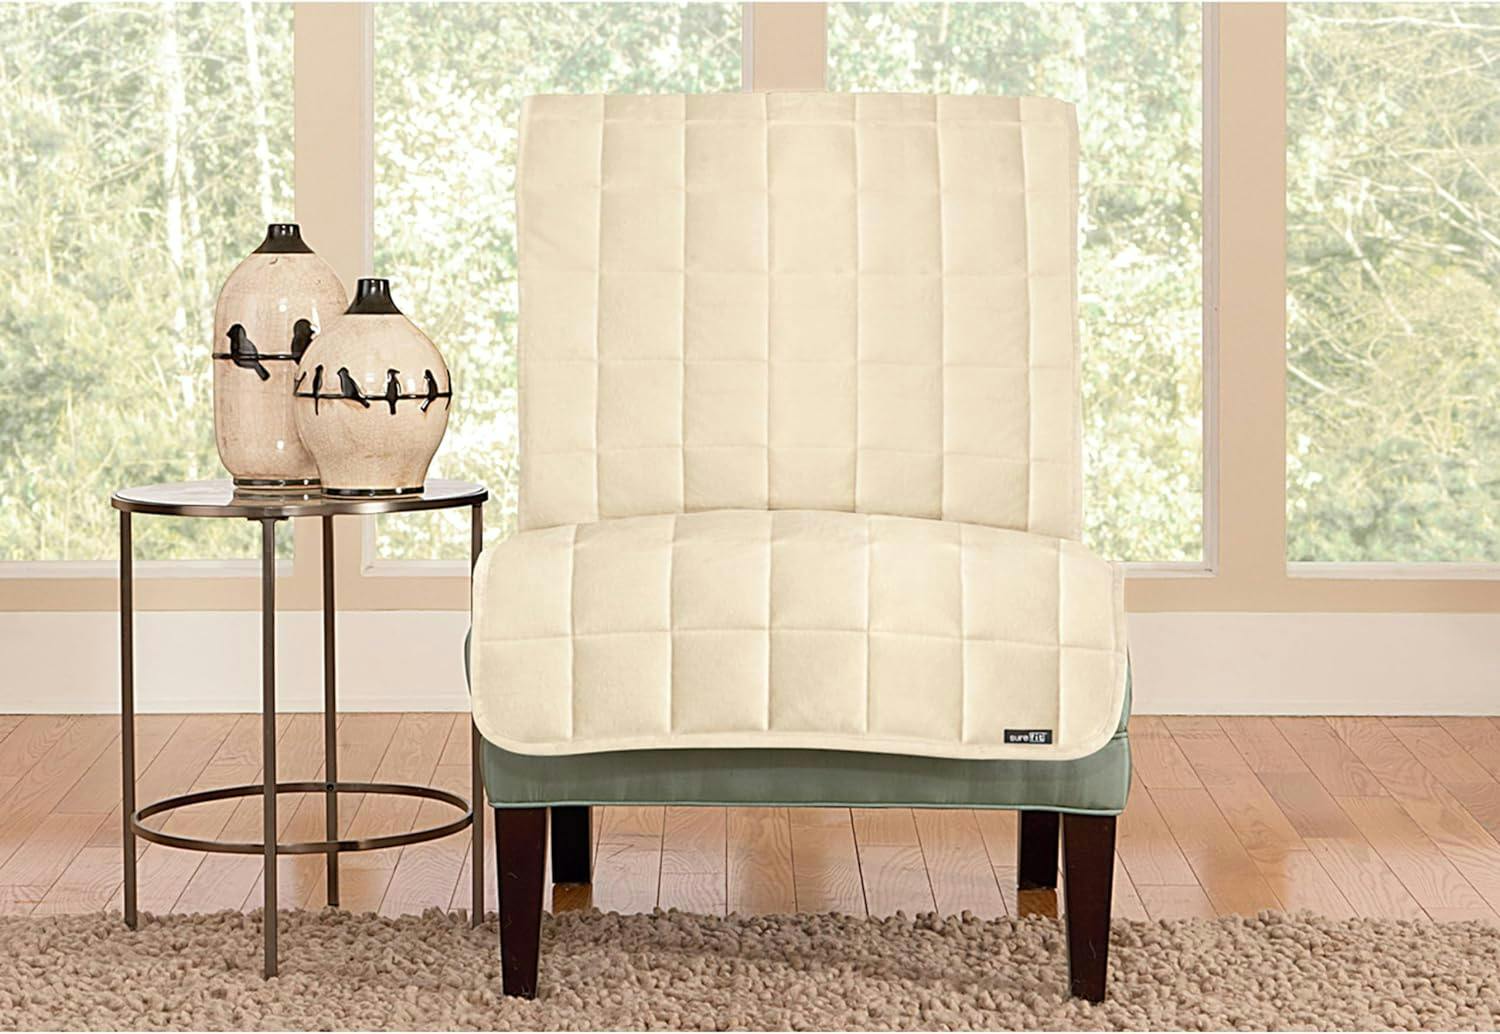 Deluxe Ivory Quilted Armless Chair Furniture Protector